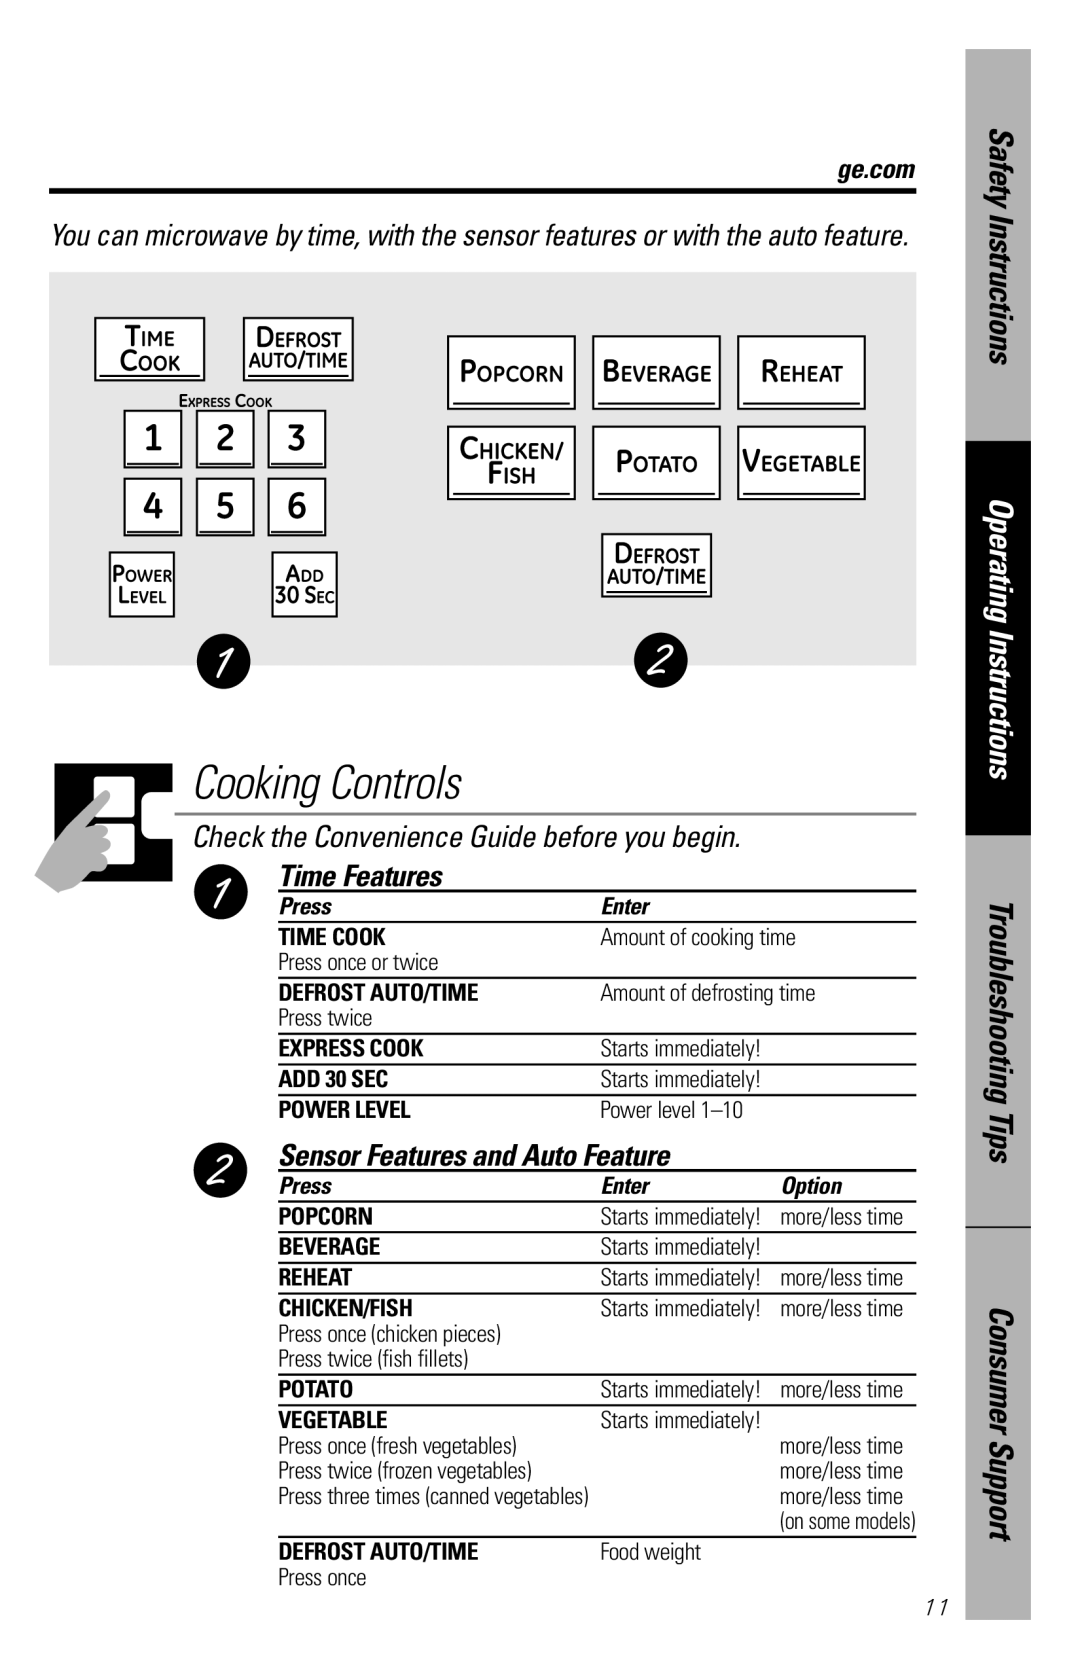 GE PEM31 Cooking Controls, Check the Convenience Guide before you begin, Time Features, Sensor Features and Auto Feature 